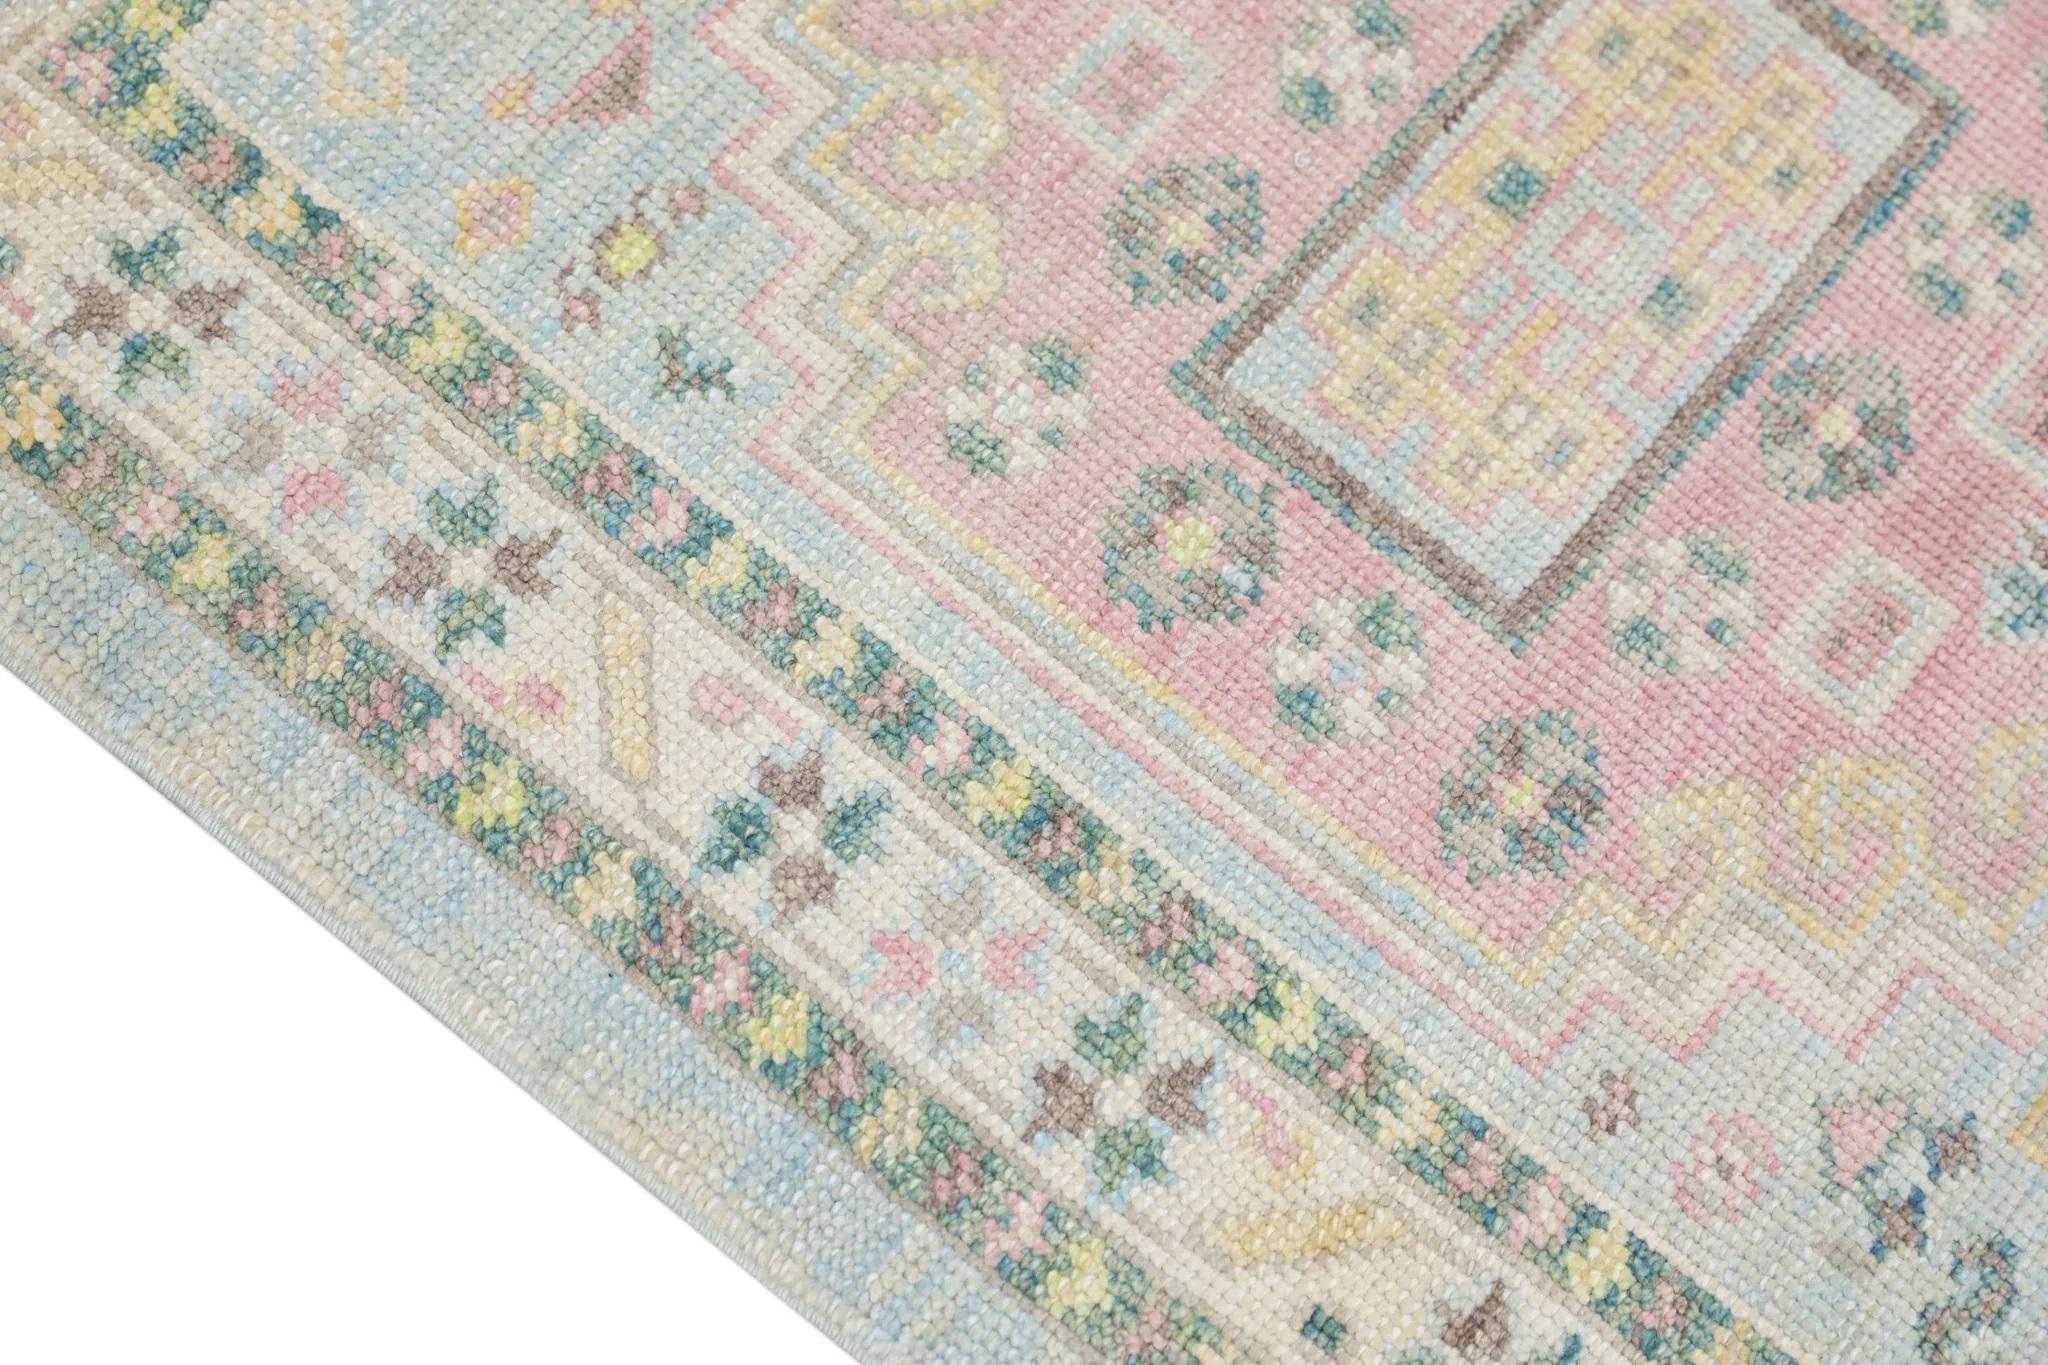 Hand-Woven Green/Pink Handwoven Wool Floral Turkish Oushak Rug 3' x 4'6